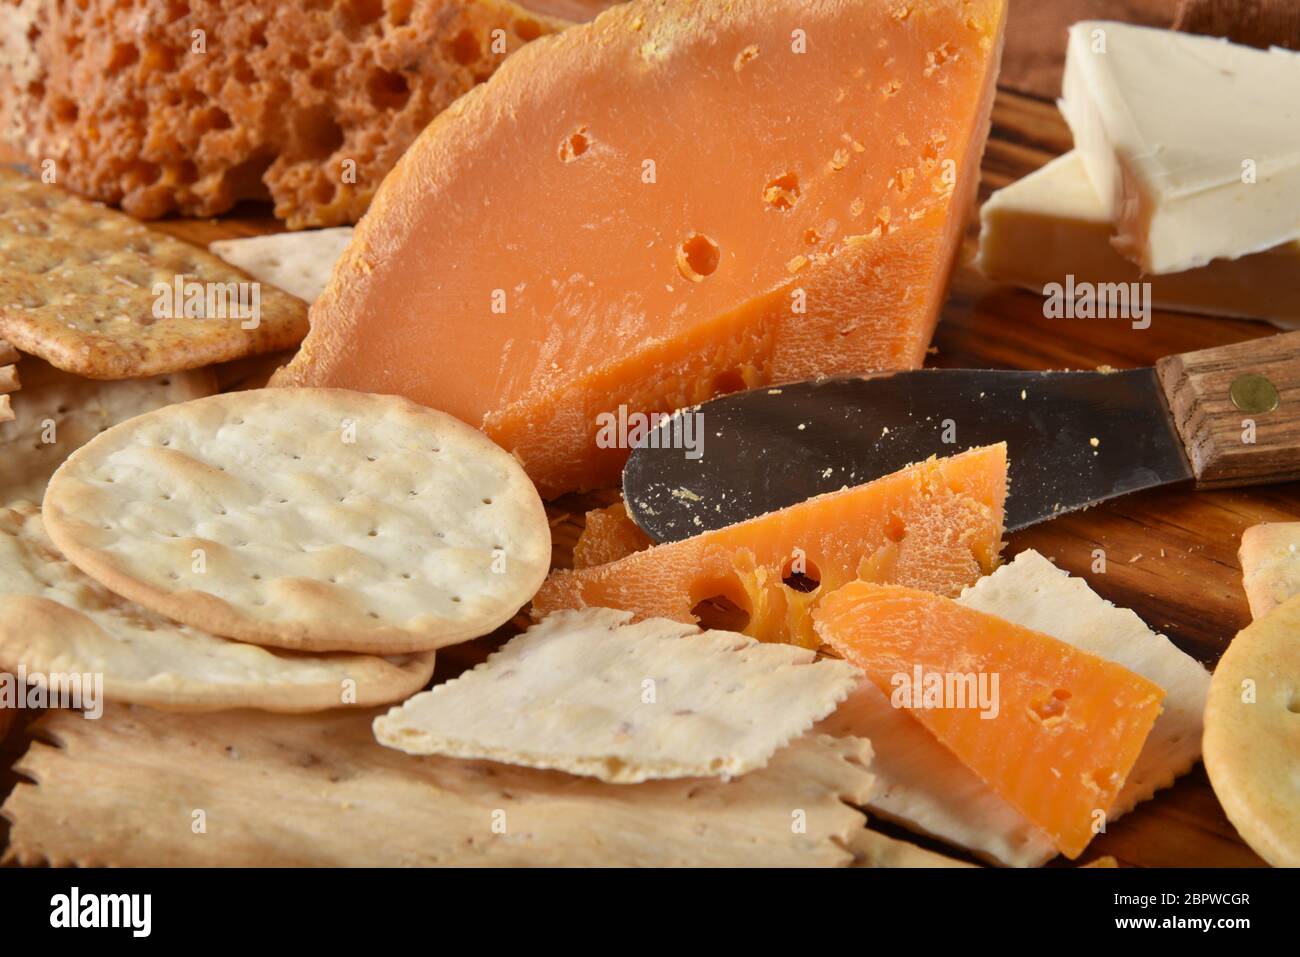 Wedges of gourmet Mimolette cheese with crackers and a cheese knife Stock Photo